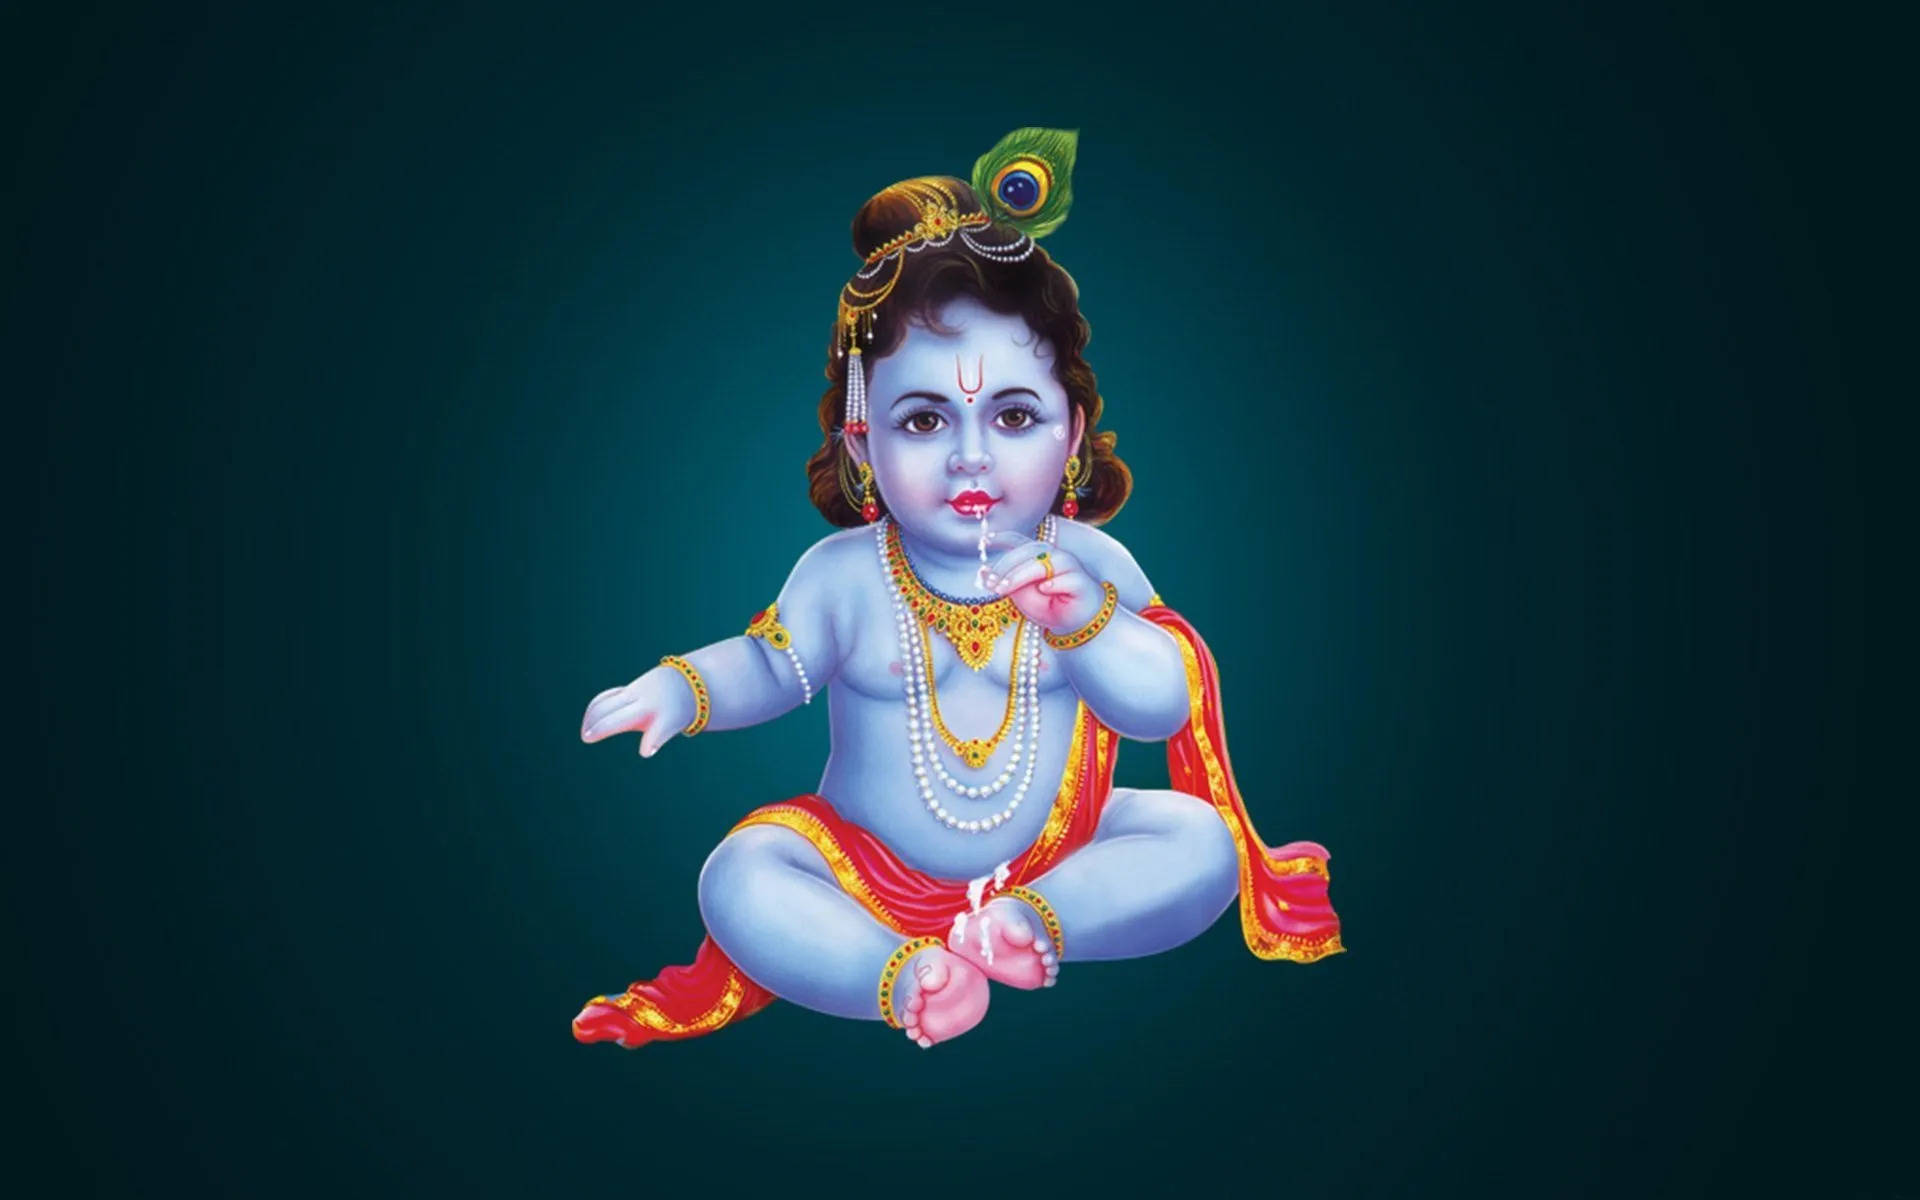 Enchanting Bal Krishna Immersed In Delightful Curd Eating Moment Background